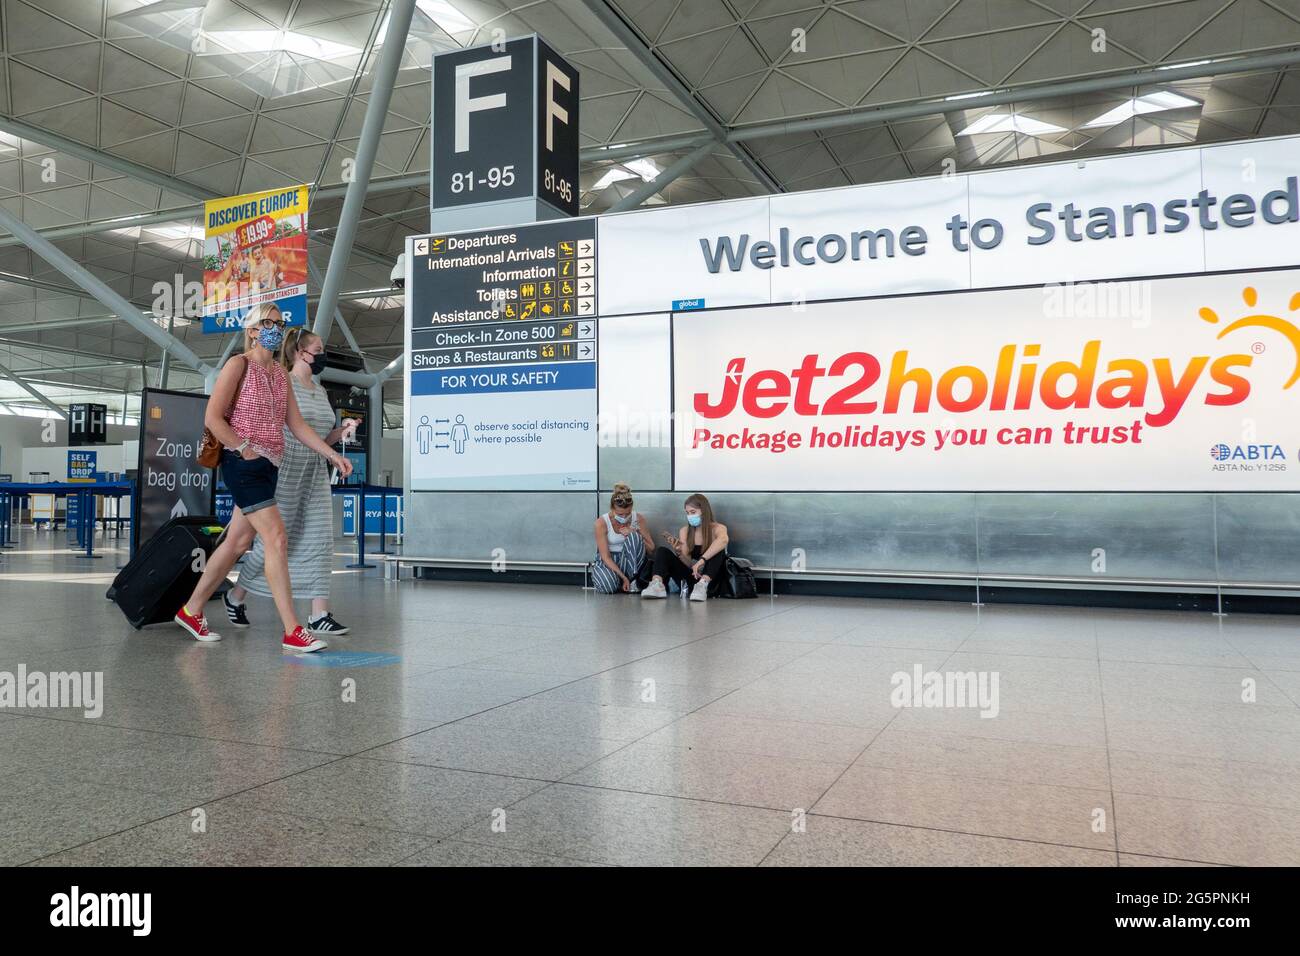 Picture dated June 3rd shows a very quiet Stansted Airport in Essex on Friday afternoon with only a few passengers flying to Europe as travel restrictions remain.  The airport is likely to remain quiet for at least the next 3 weeks as countries remain on  the Amber and Red  List and Portugal is reported to be removed down to amber. Stock Photo